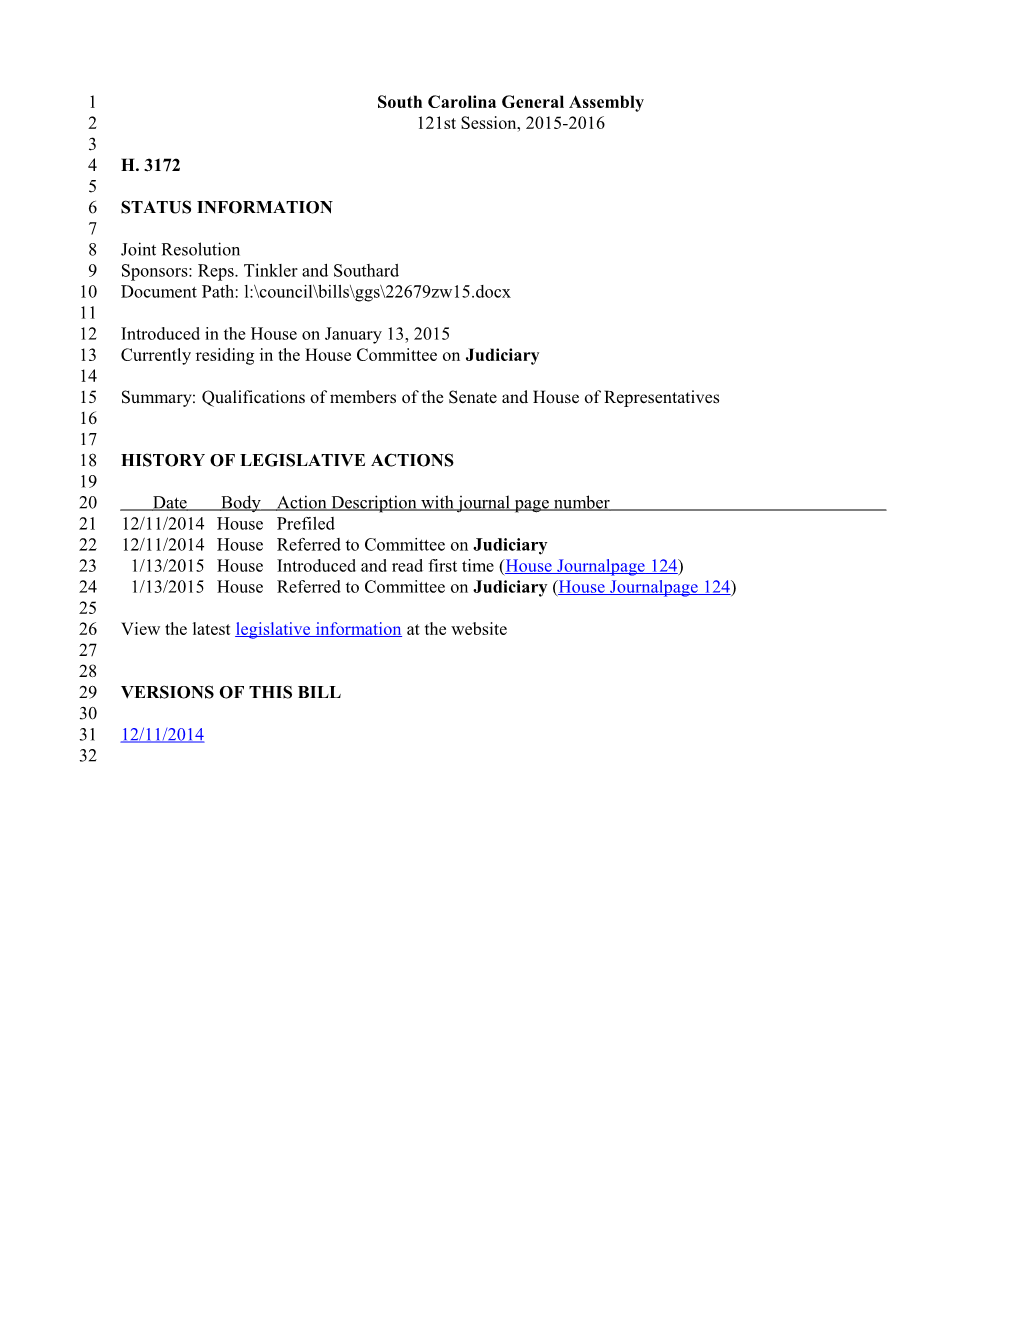 2015-2016 Bill 3172: Qualifications of Members of the Senate and House of Representatives